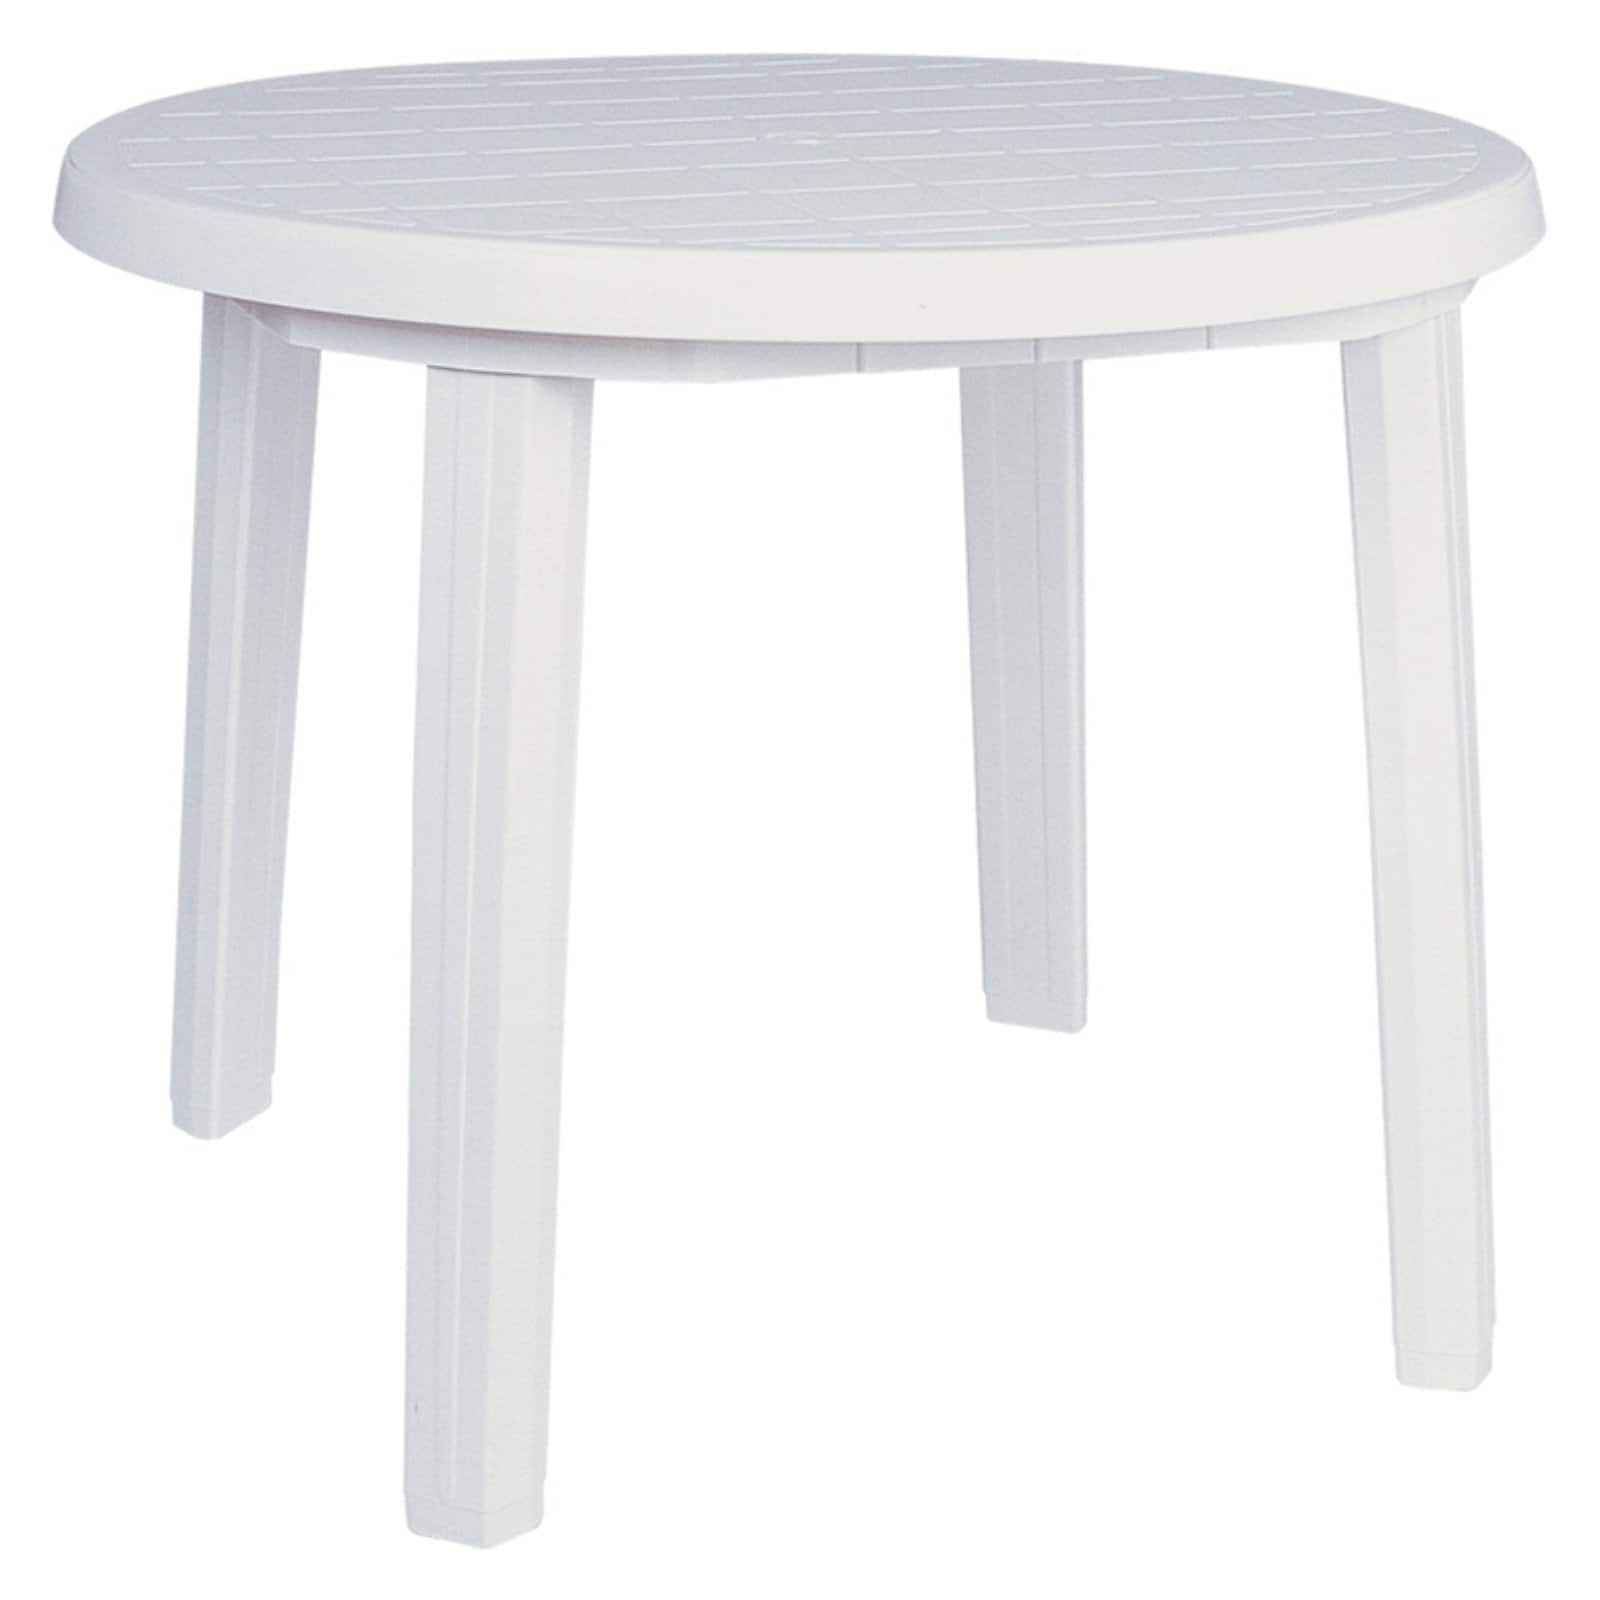 Compamia Ronda 36" Round Resin Outdoor Patio Dining Table in White - image 3 of 4